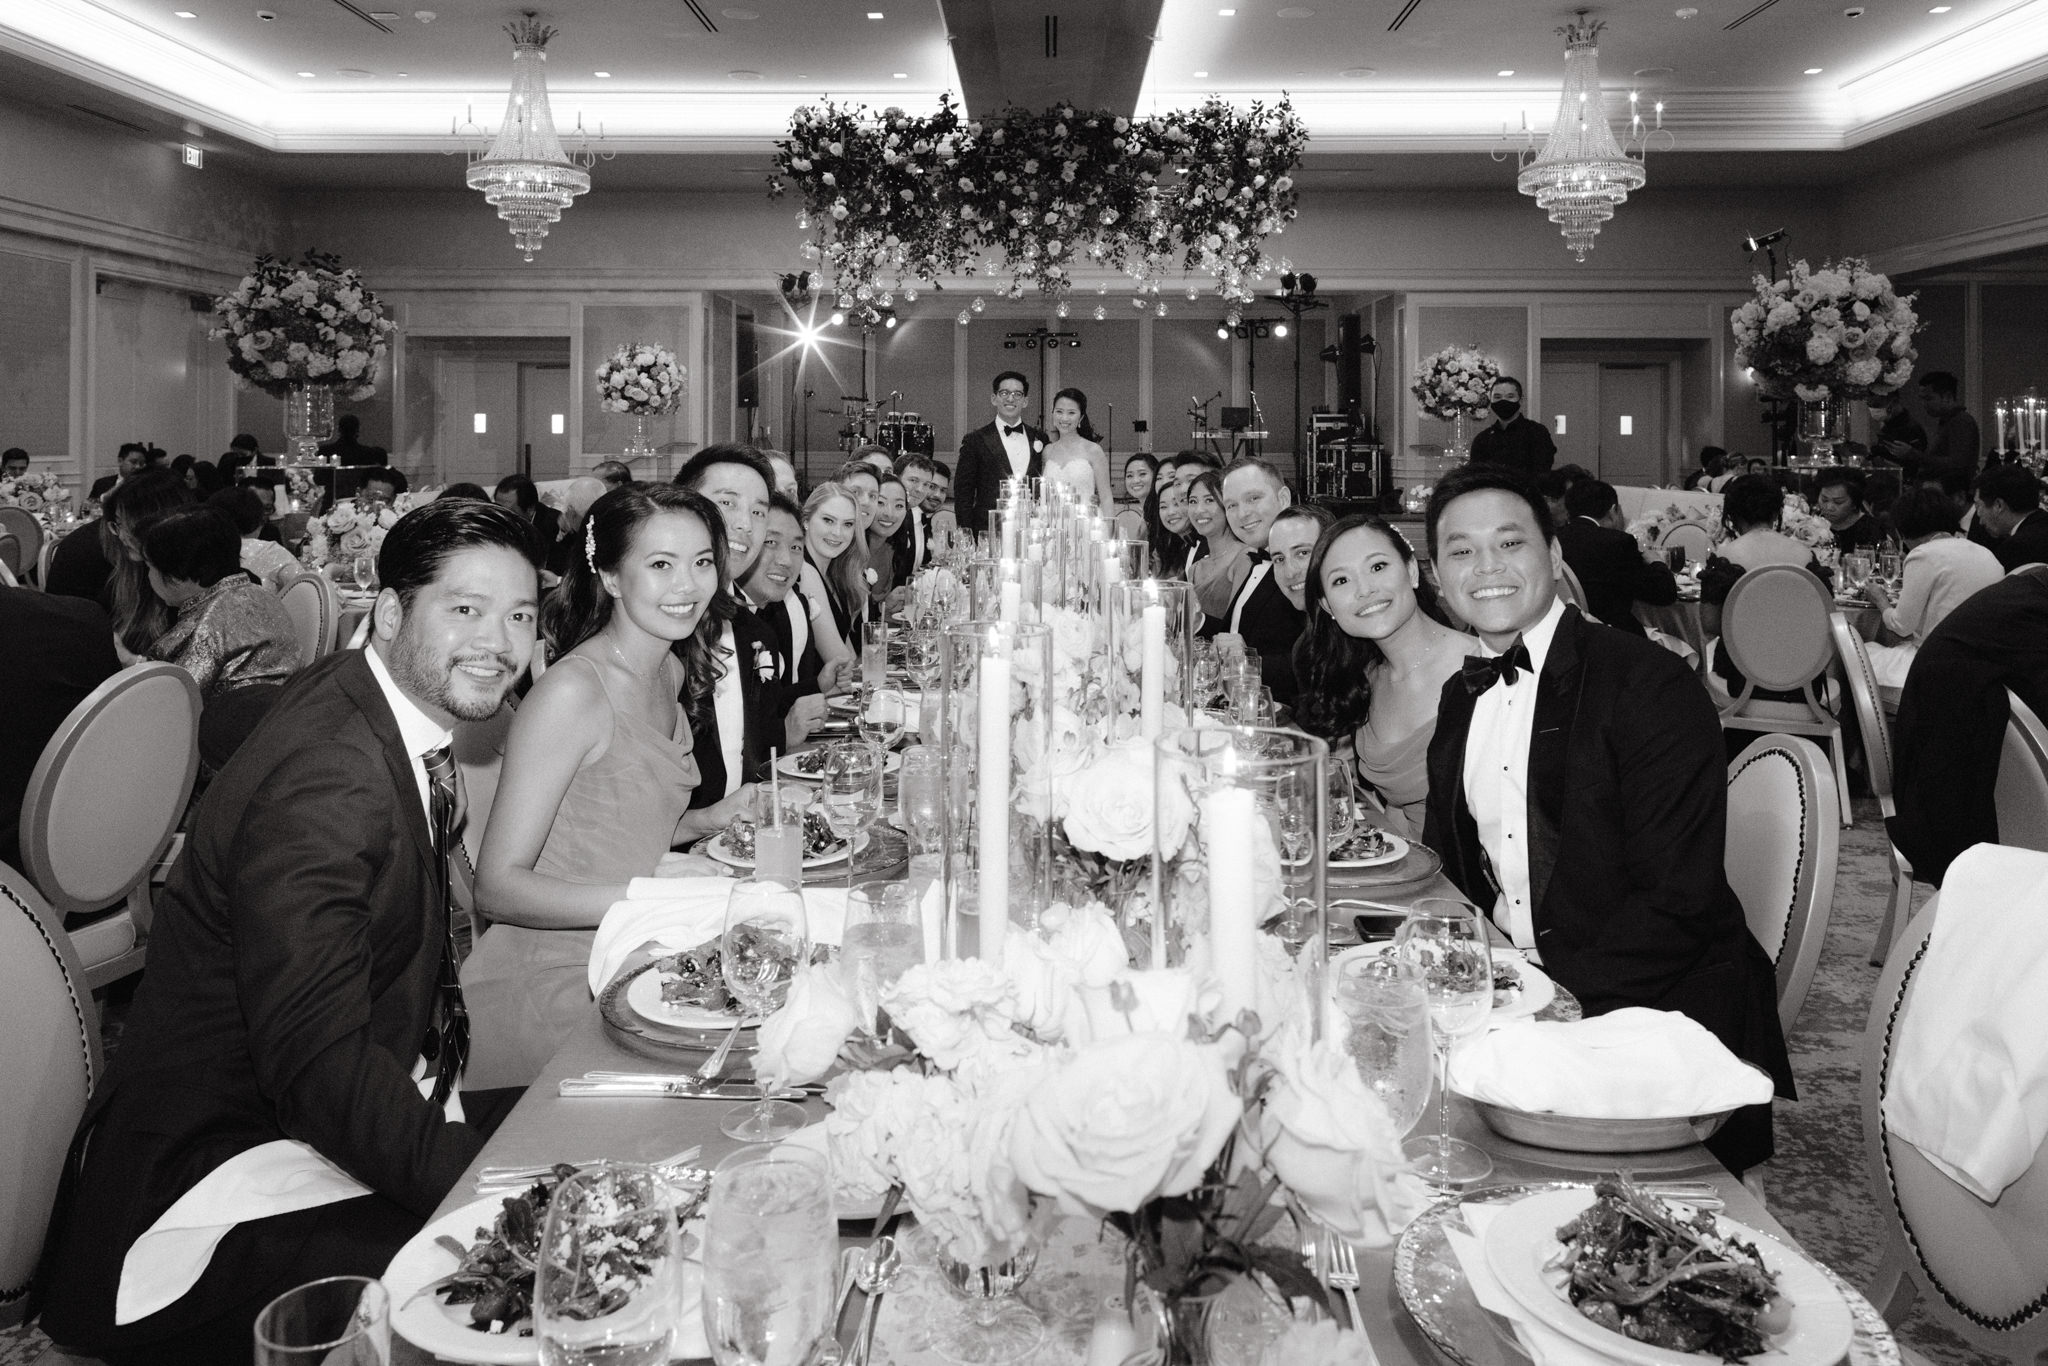 Black and white image of the happy guests seated on the dining table in the wedding reception. Wedding venue image by Jenny Fu Studio